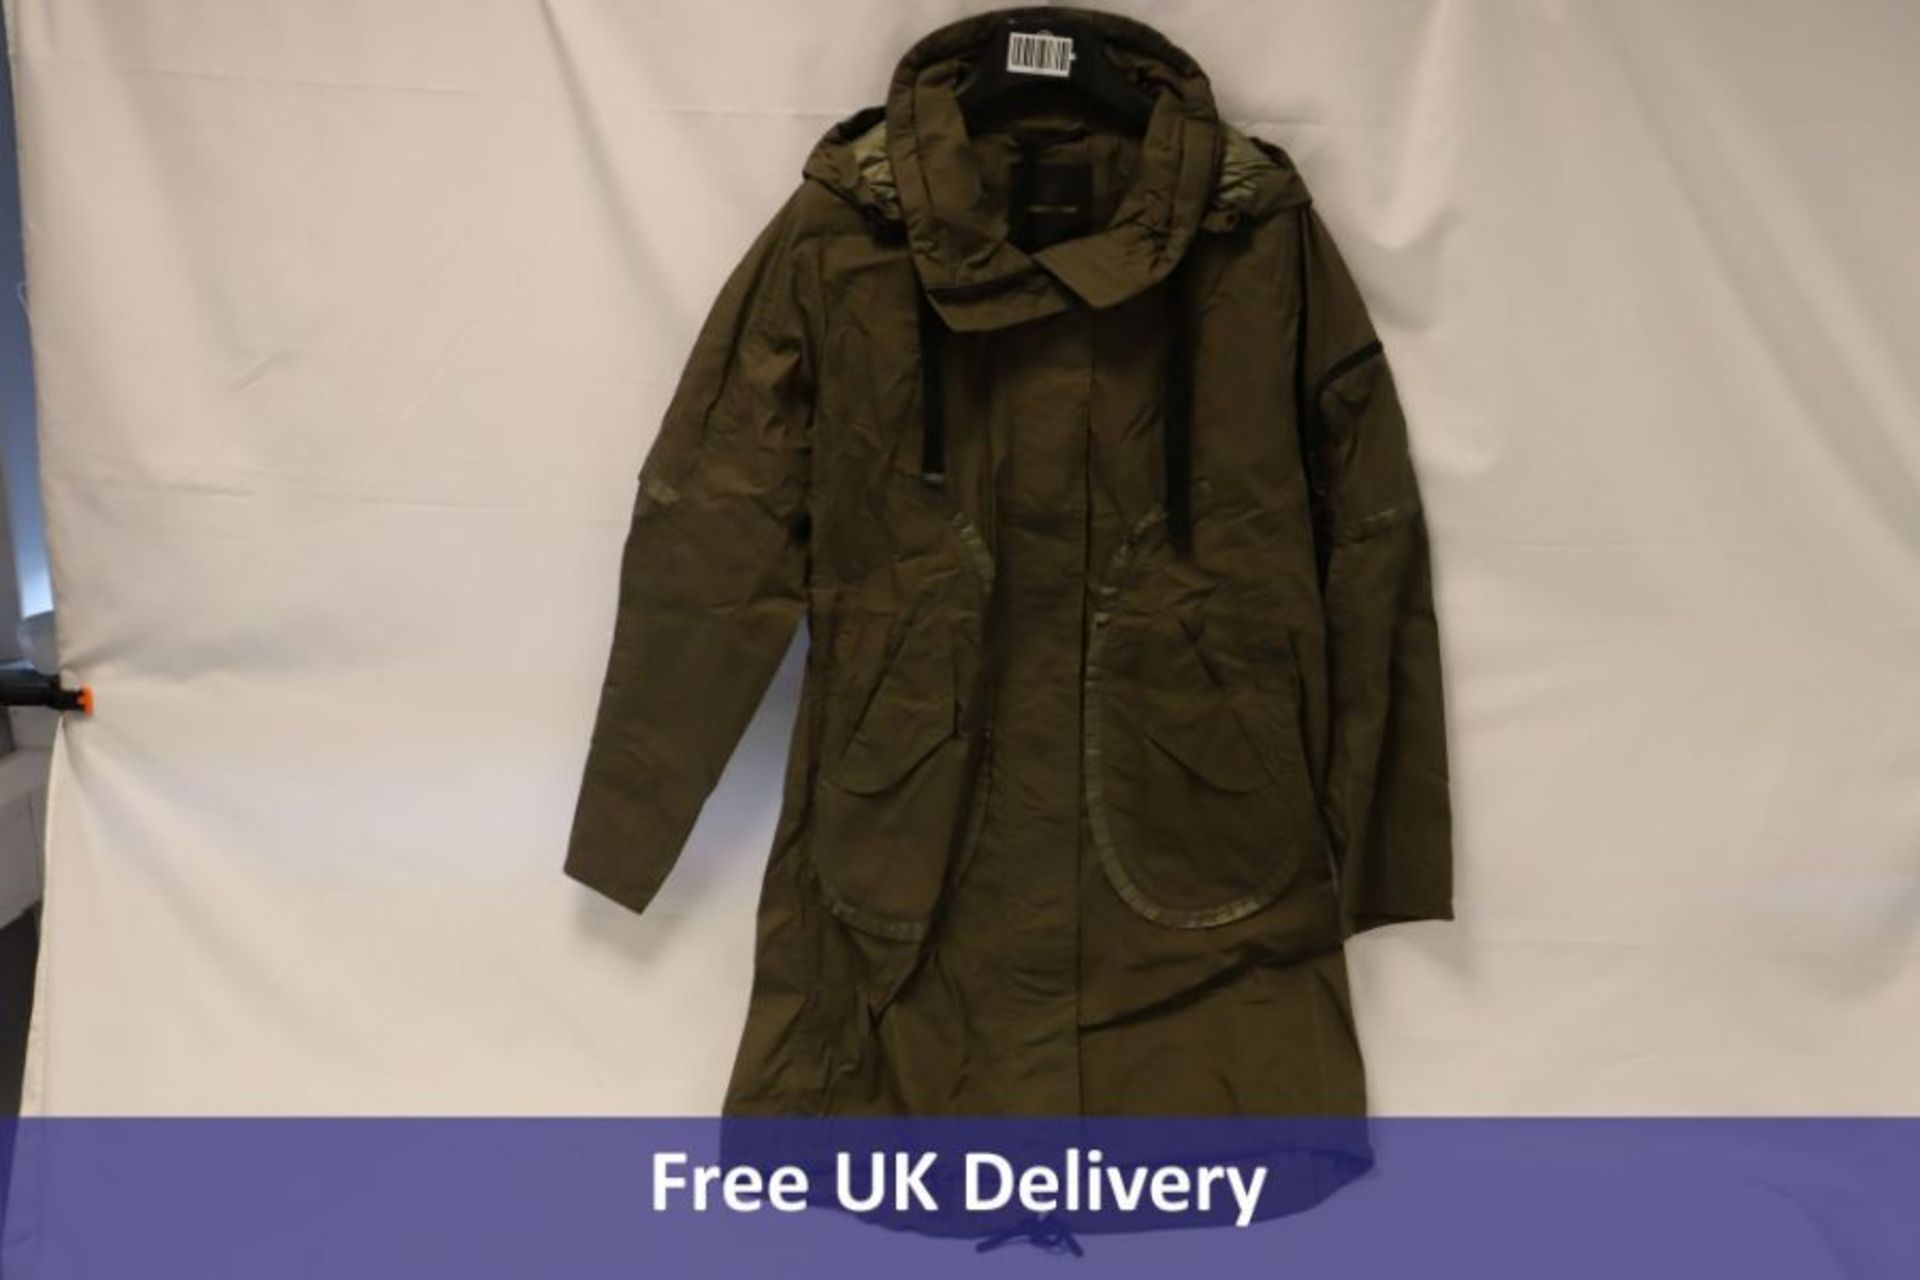 Creenstone Waxed Cotton Parka, Summer Army, Size 40